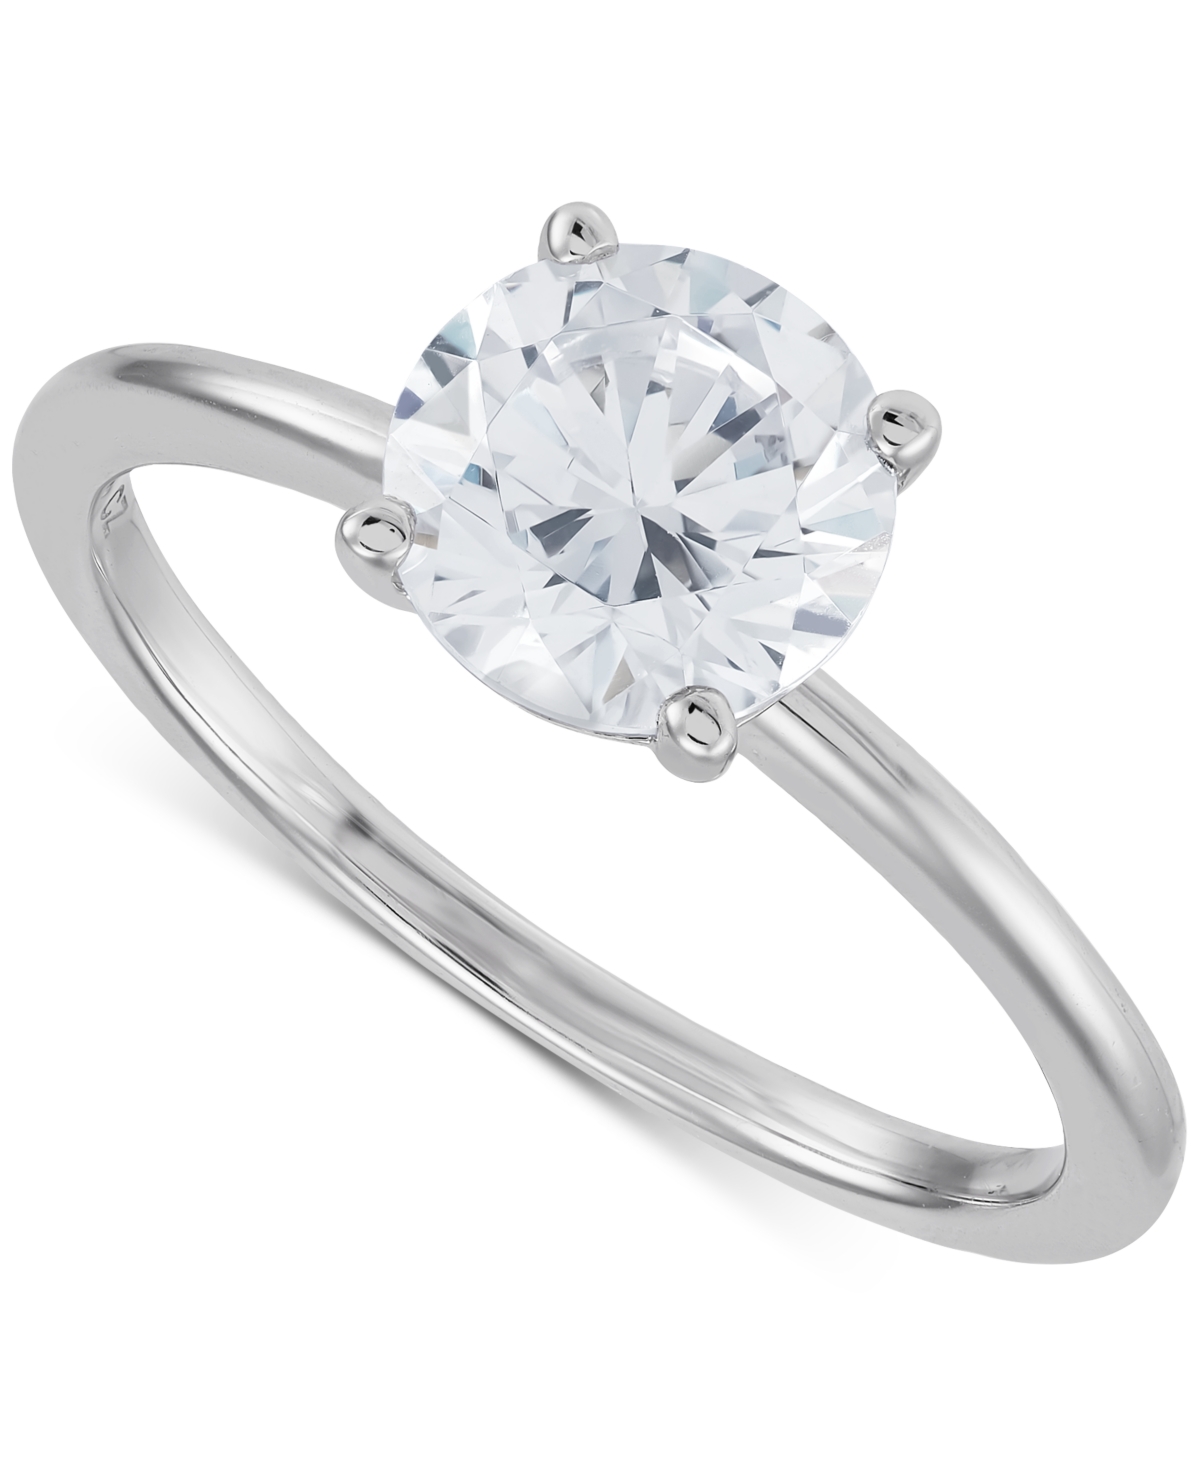 Igi Certified Lab Grown Diamond Solitaire Engagement Ring (1-1/2 ct. t.w.) in 14k White Gold - White Gold